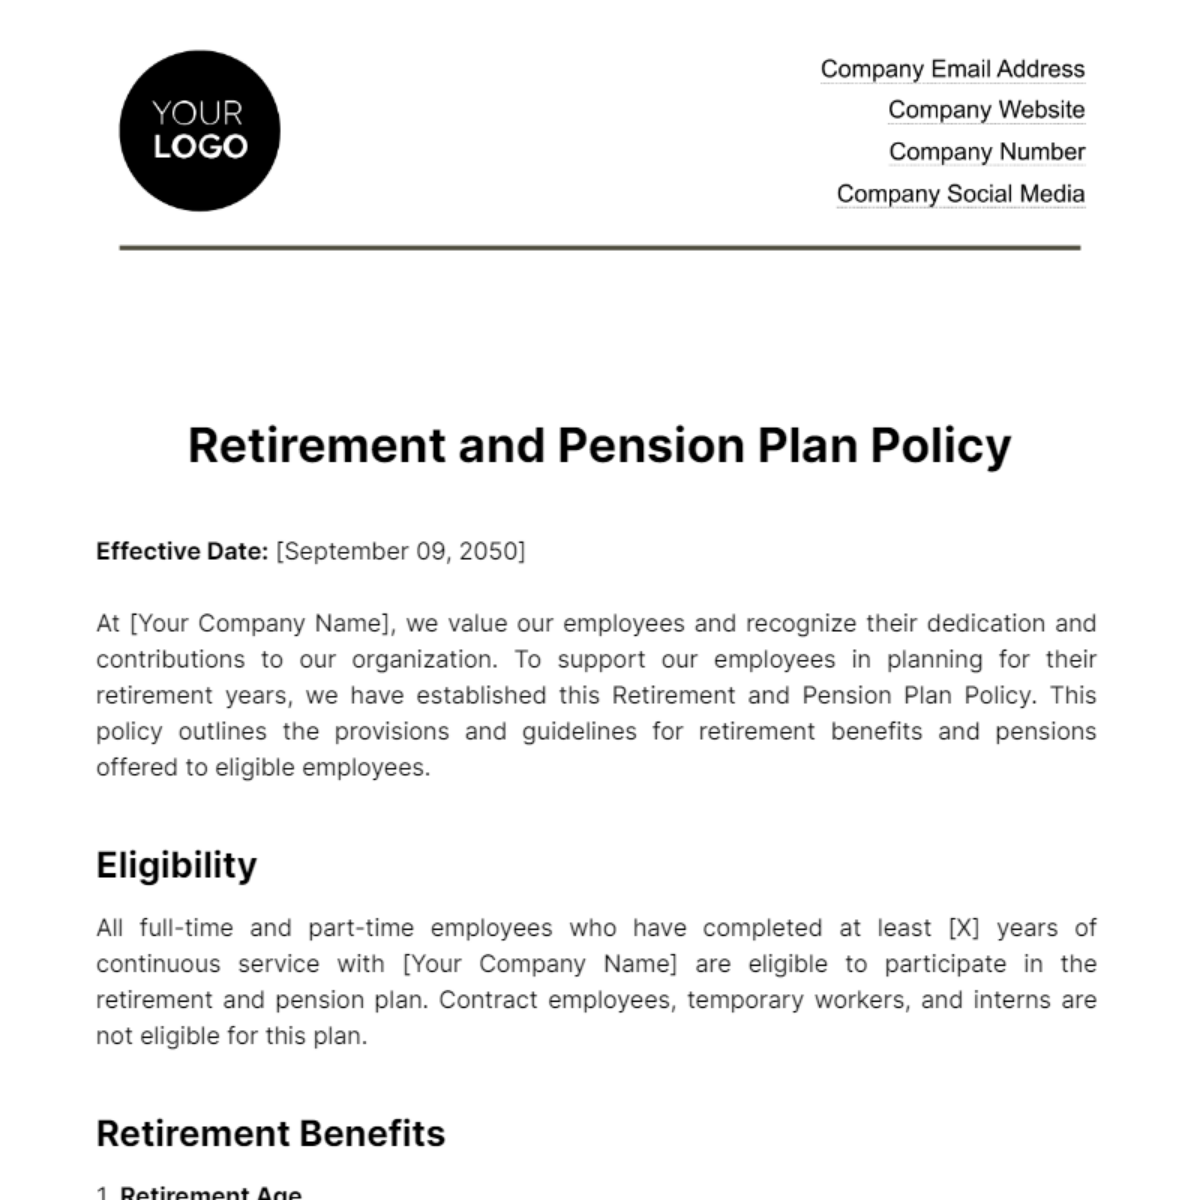 Retirement and Pension Plan Policy HR Template